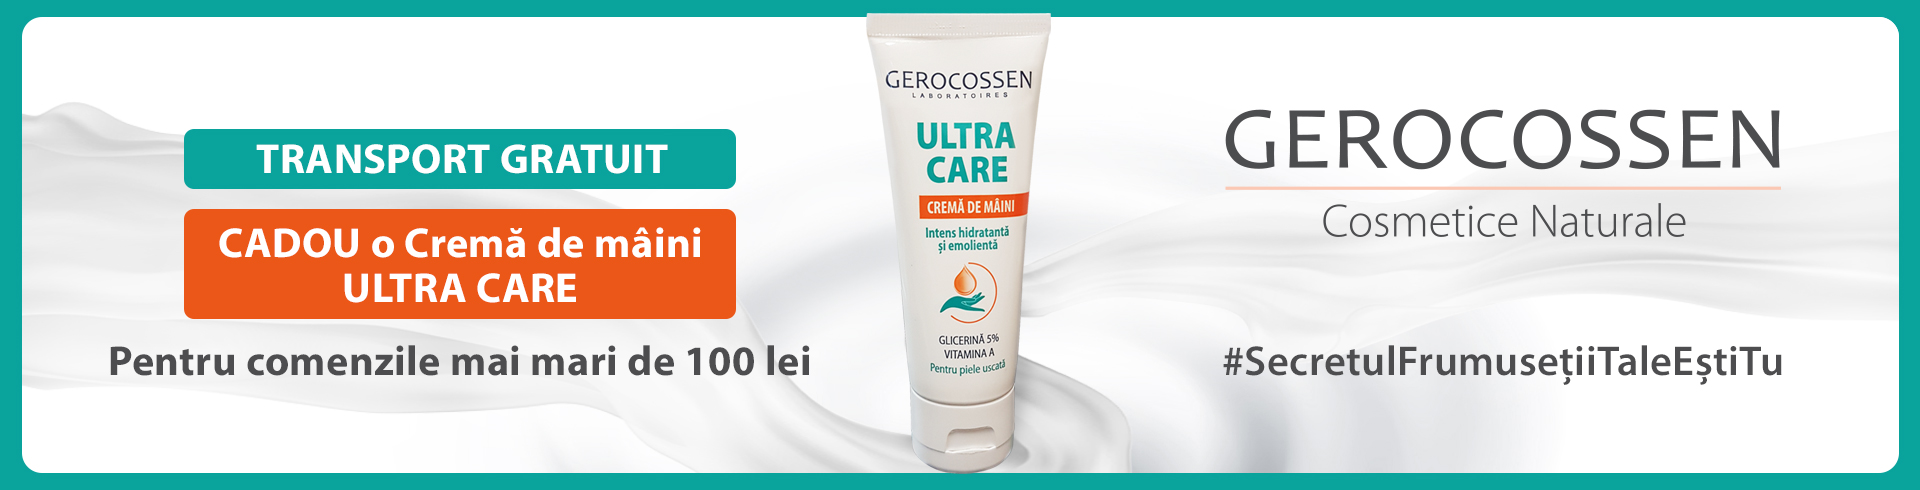 Ultra care 1920 x 490px oct